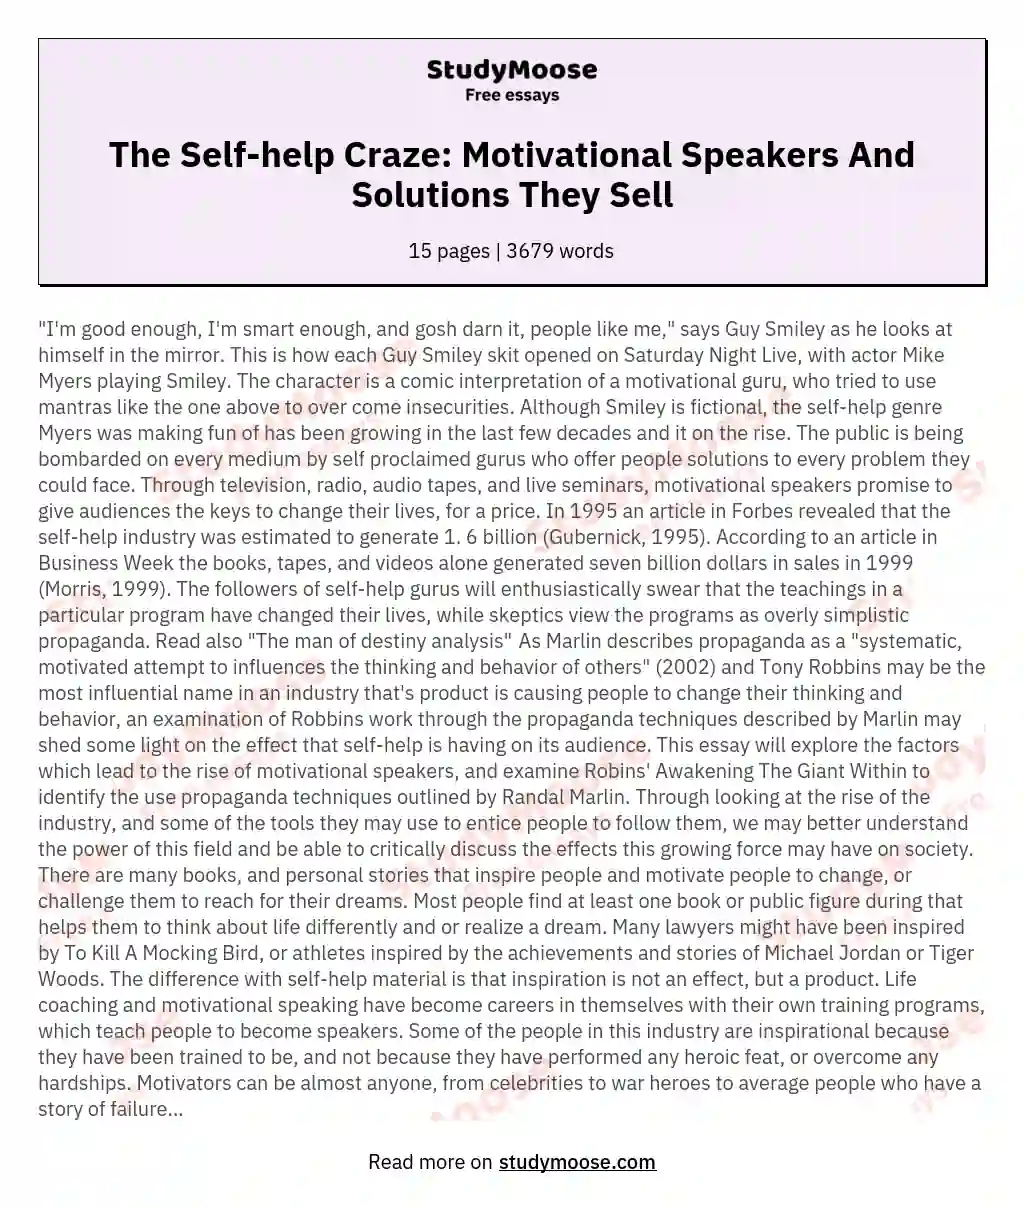 The Self-help Craze: Motivational Speakers And Solutions They Sell